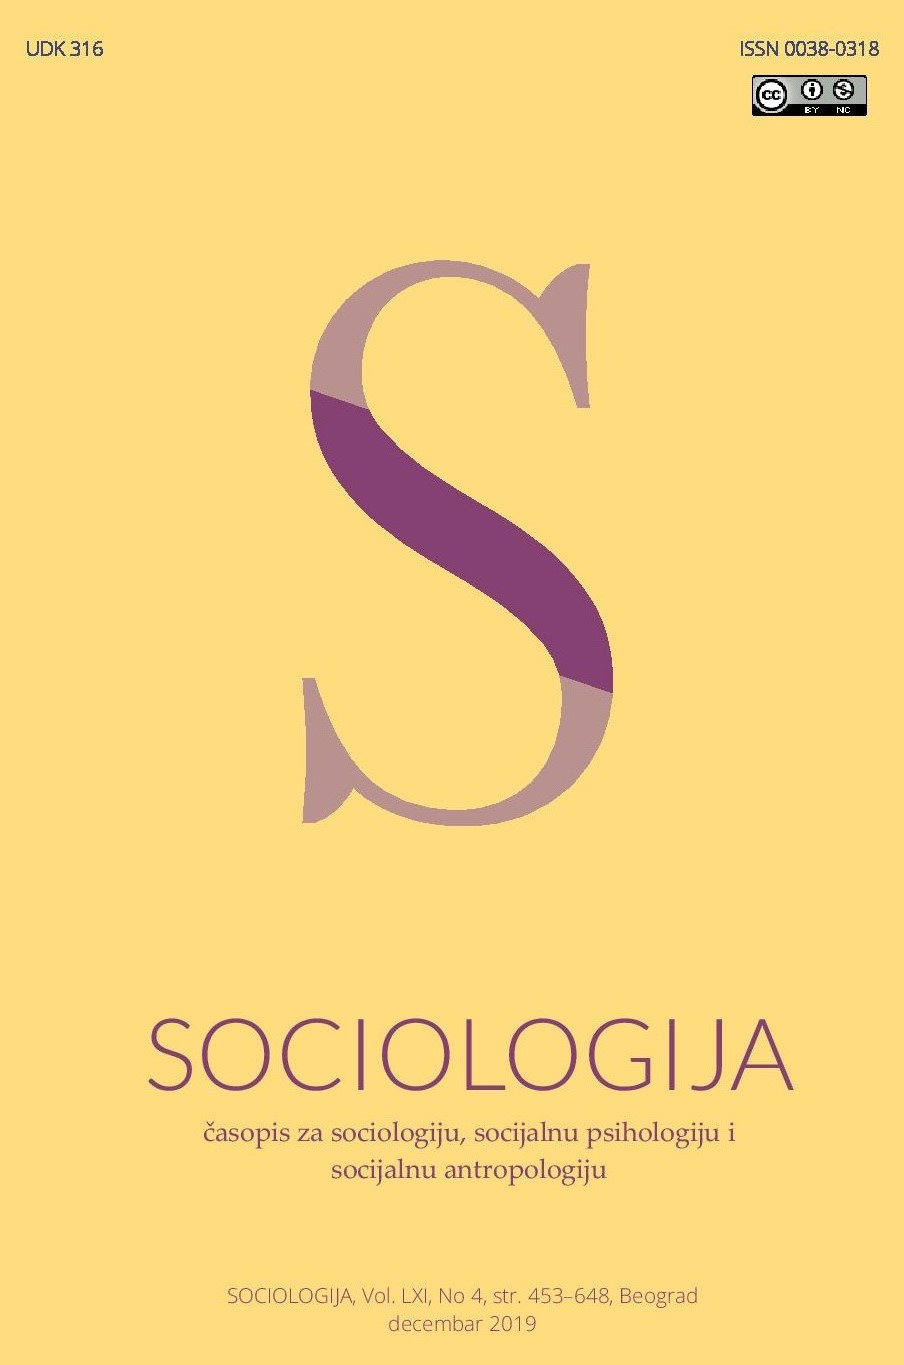 Sociological Study of the Internet: Towards the Establishment of Digital Sociology in Serbia